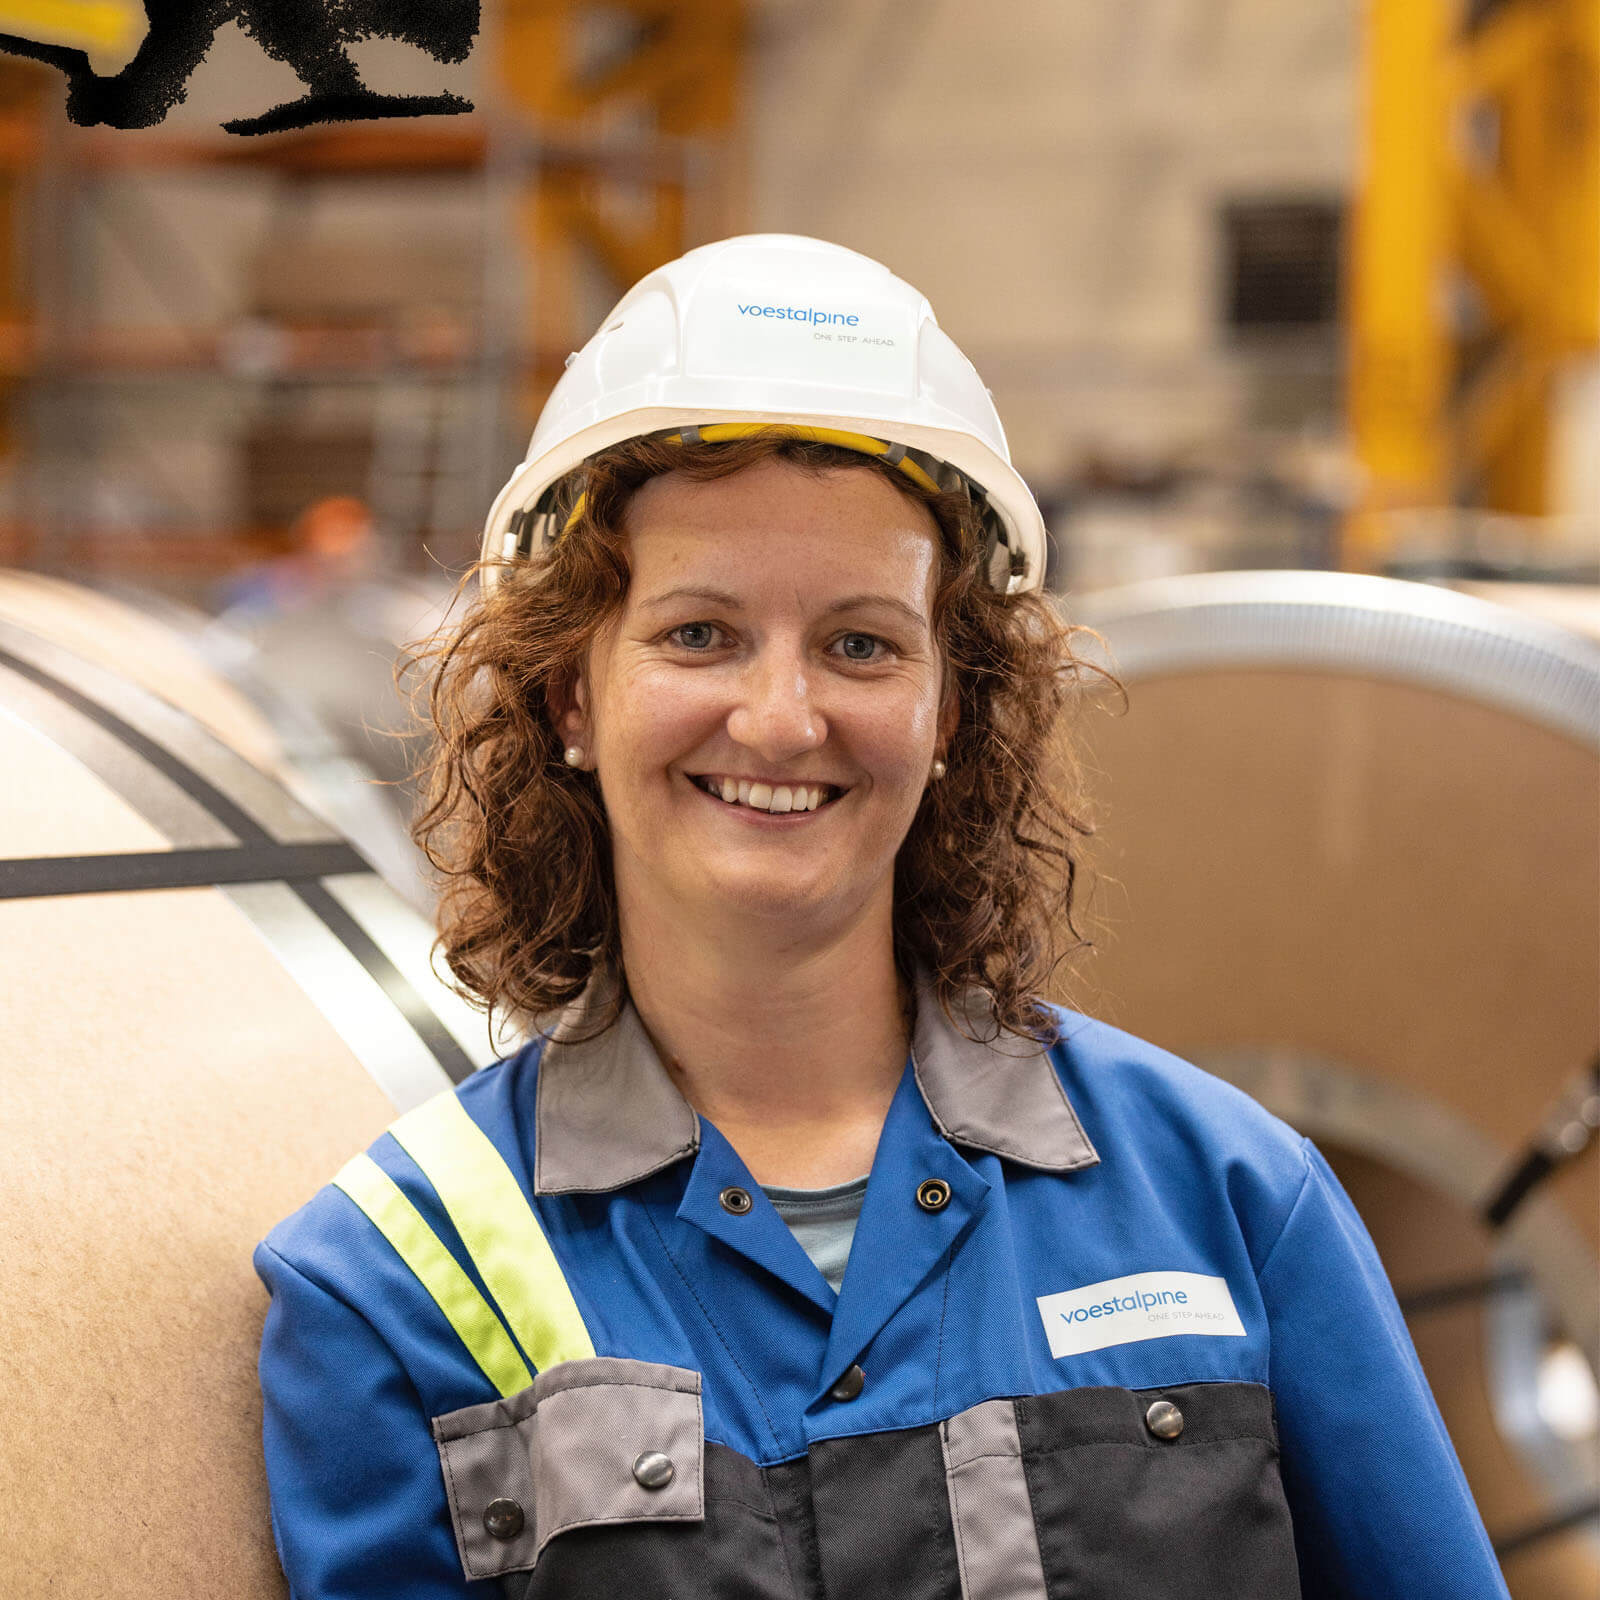 Voestalpine employee Michaela took part in the image film and smiles for the camera at her workplace